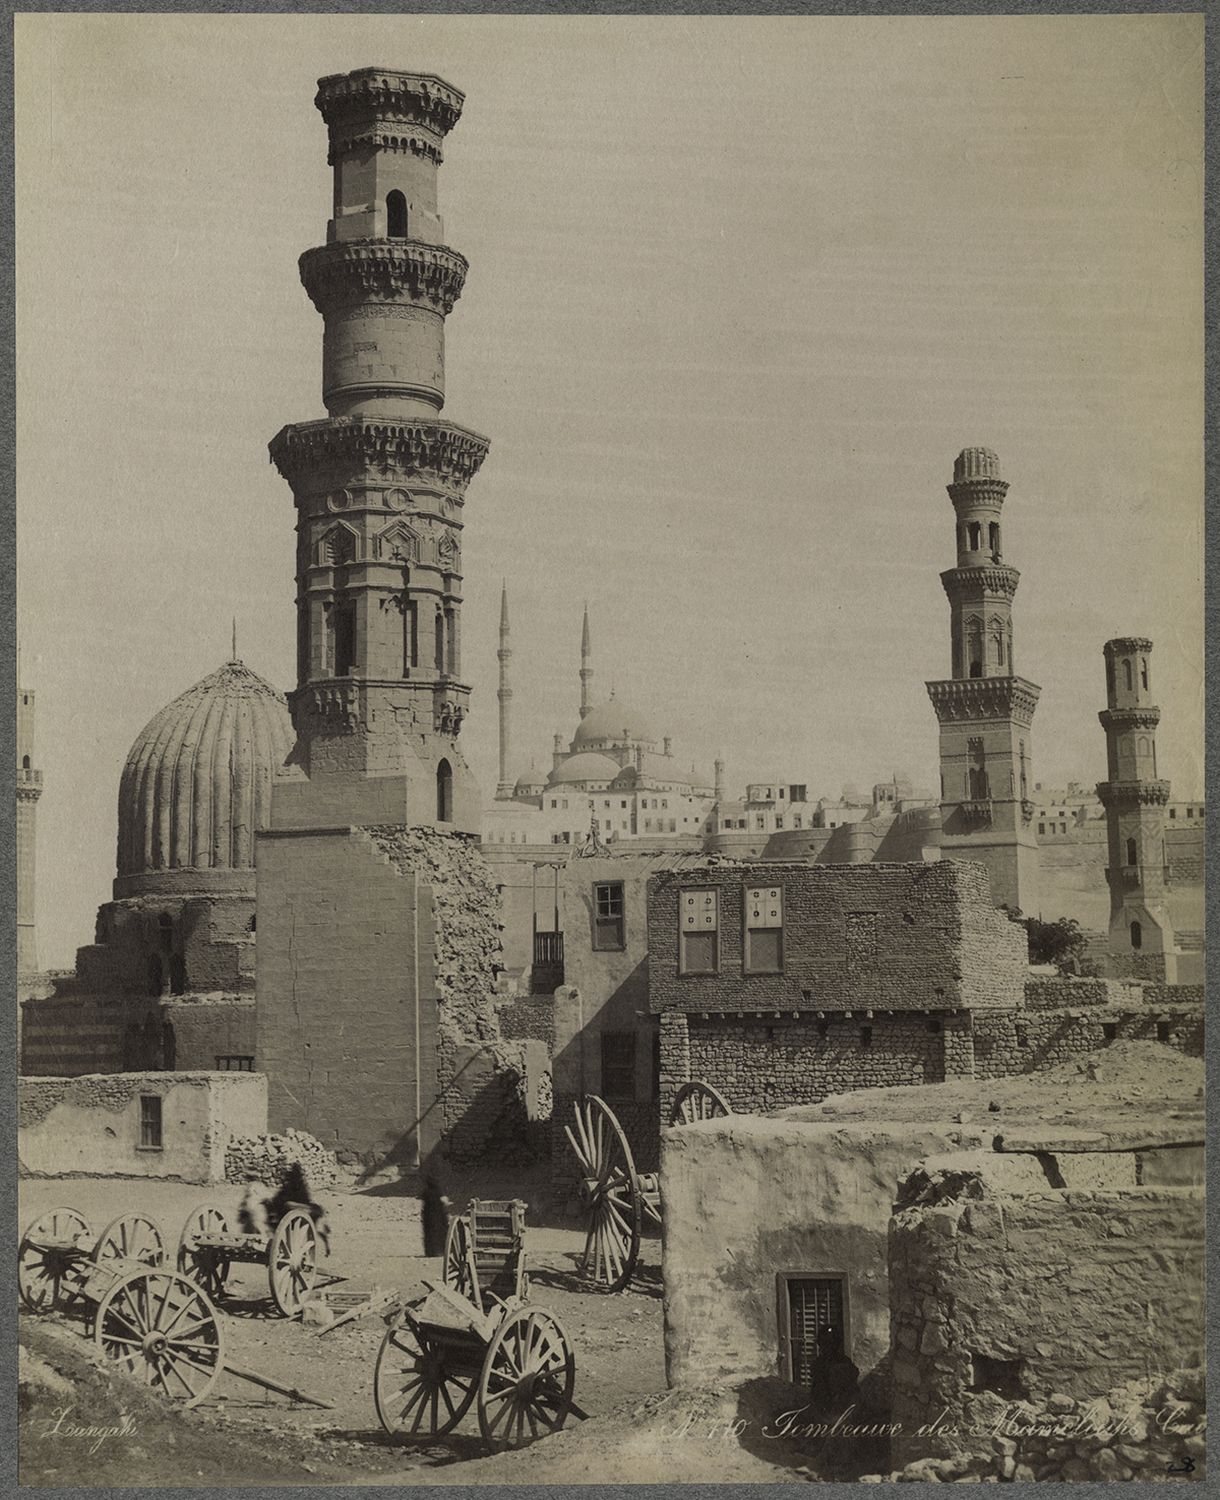 View of monuments in Cairo's Southern Cemetery. The minaret associated with the Mosque of Amir Qawsun al-Nasiri is visible in the foreground. The minarets of the Sultaniyya Complex are visible in background.